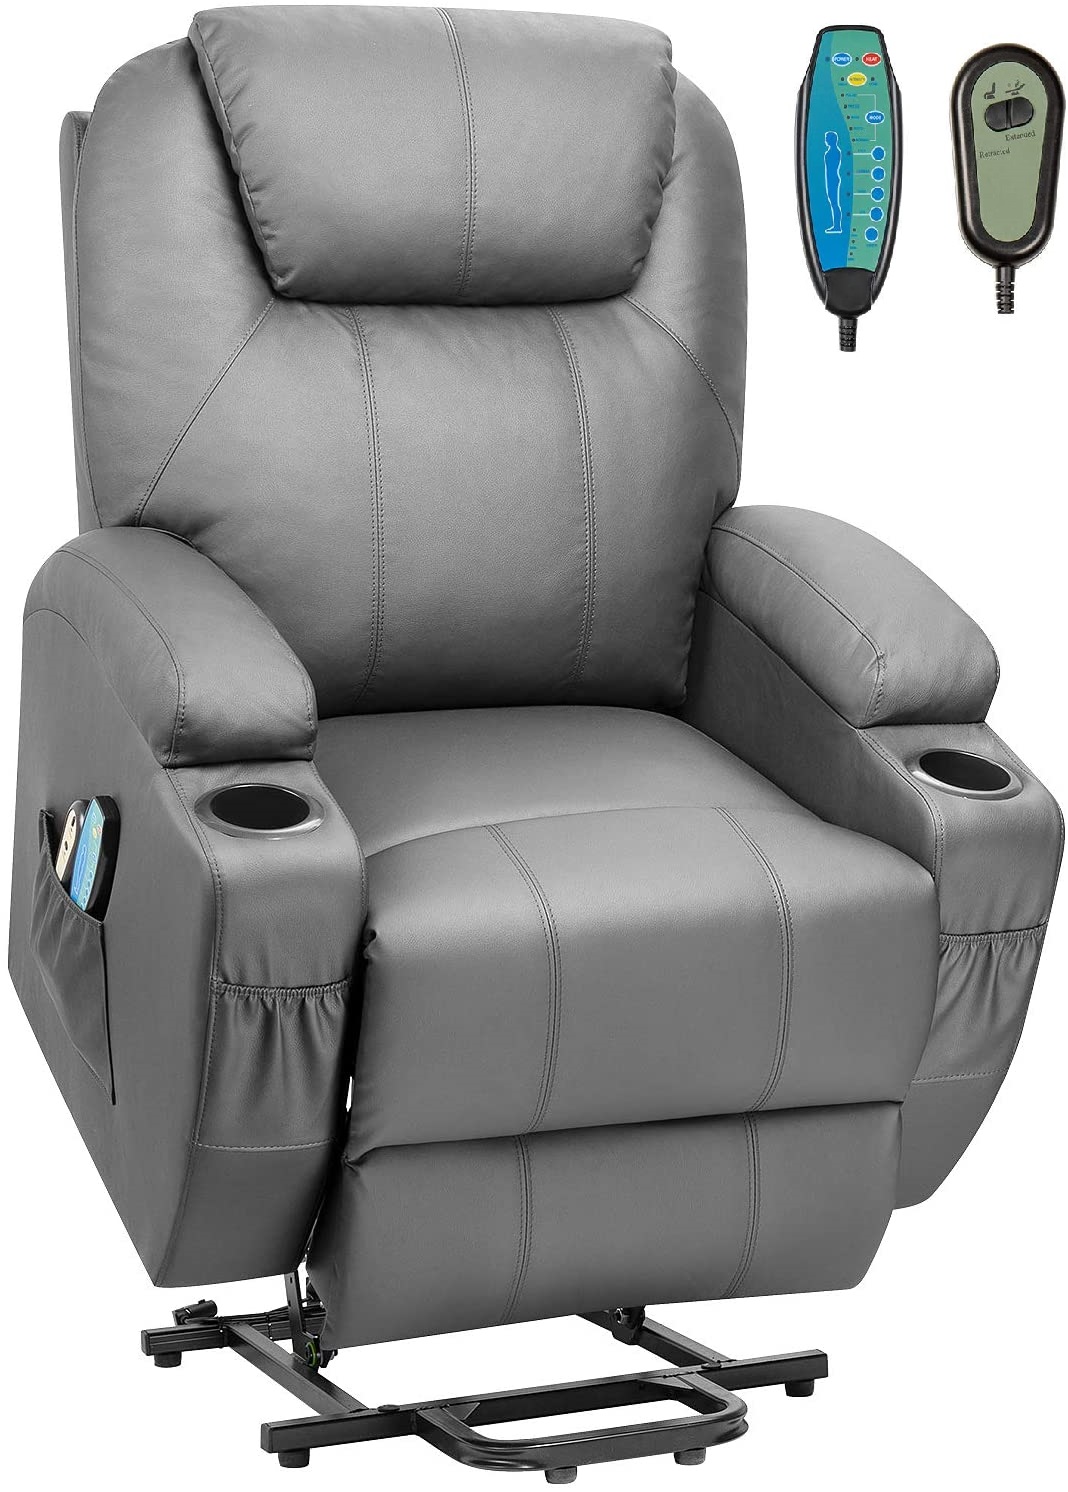 Vineego Electric Reclining Chair with Massage and Heating,Faux Leather,Gray - image 1 of 5